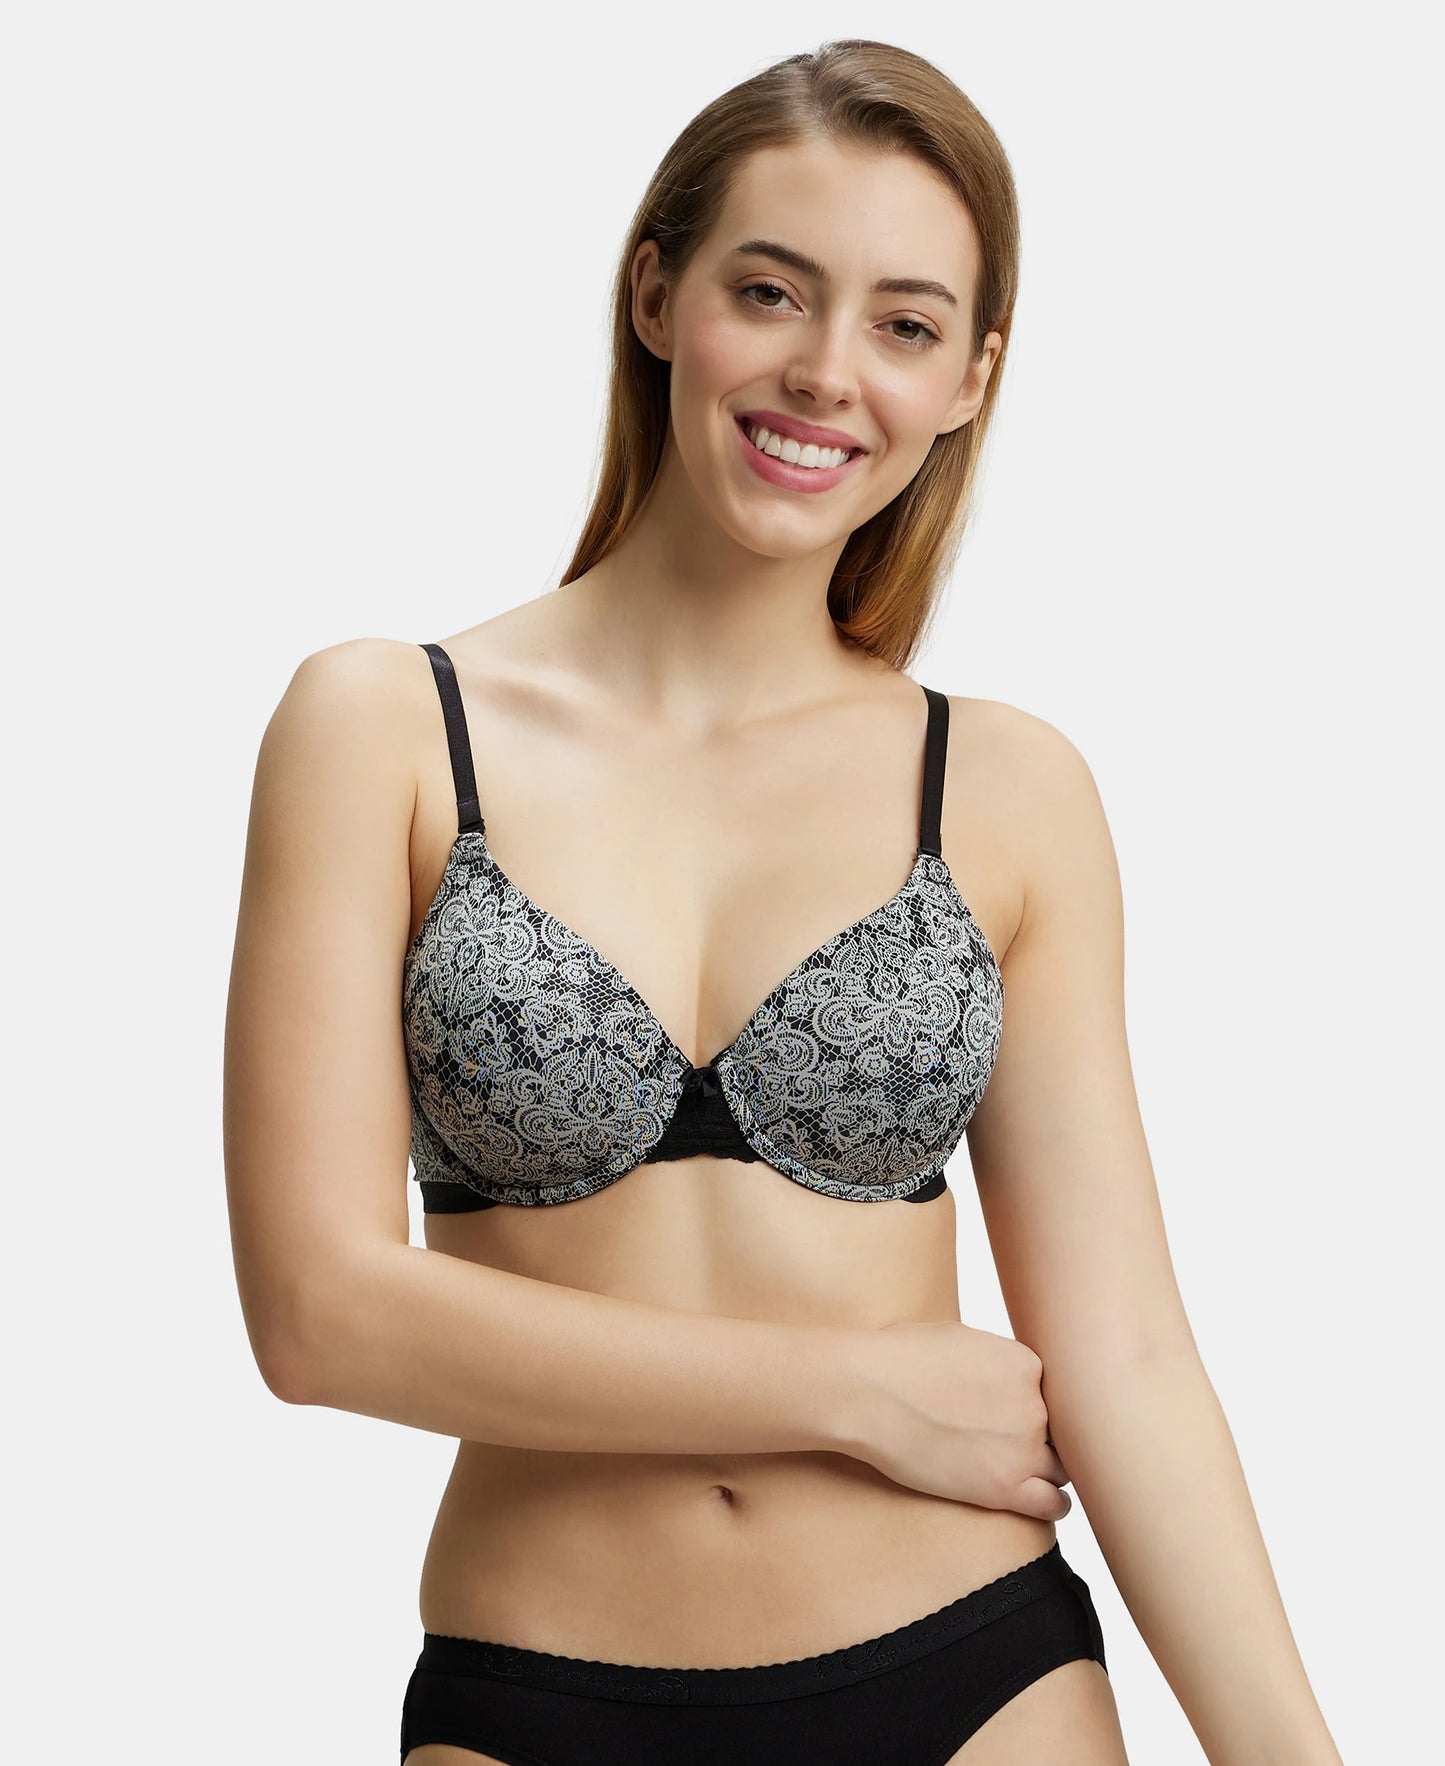 Under-Wired Padded Soft Touch Microfiber Elastane Full Coverage T-Shirt Bra with Lace Styling - Black Printed-5